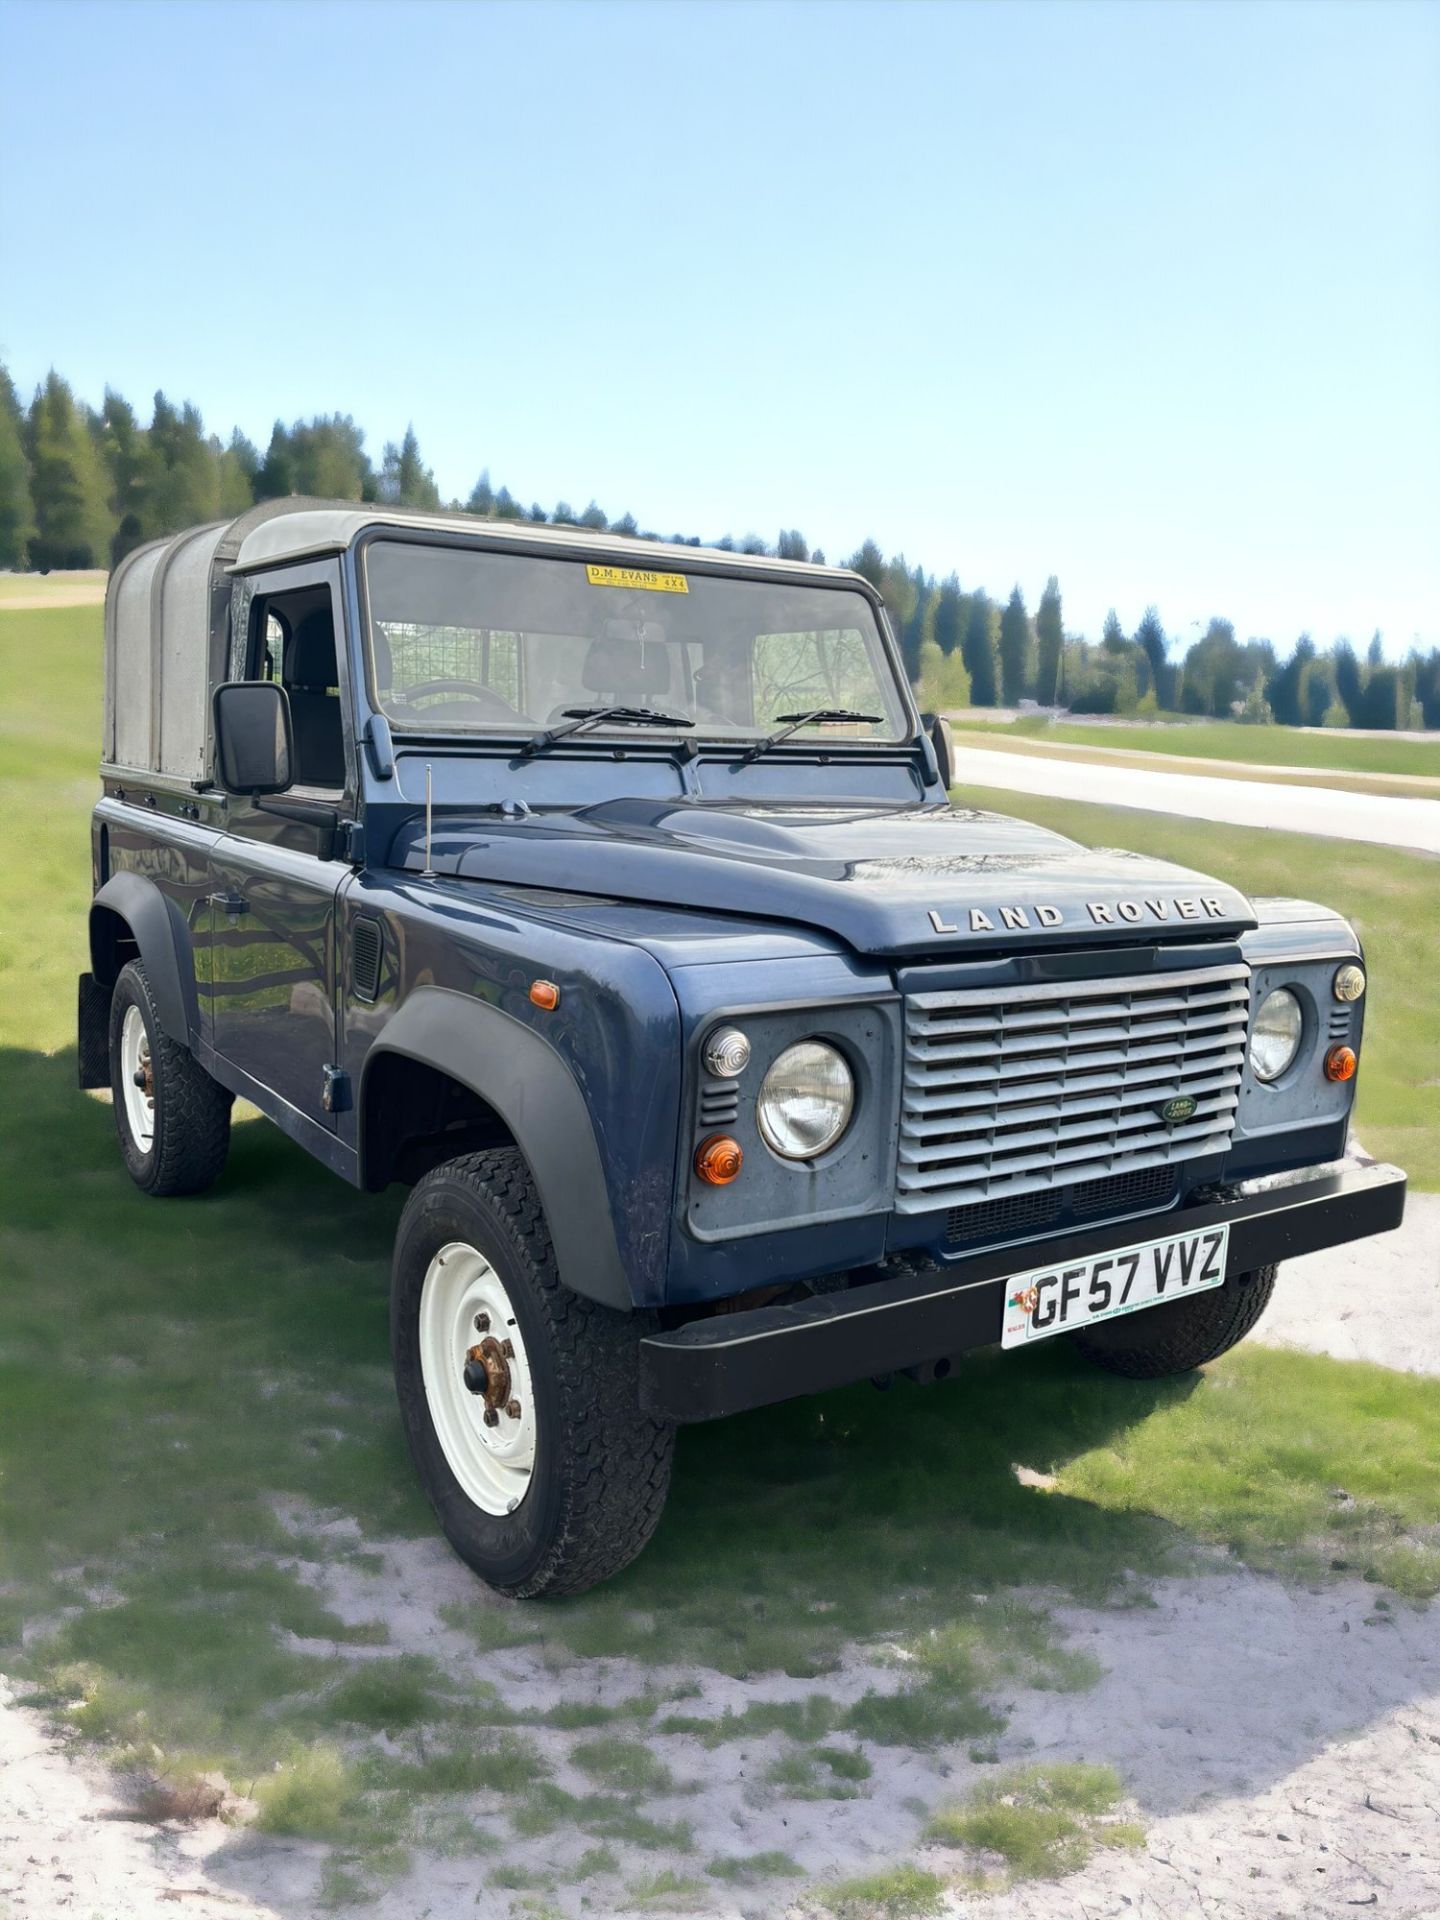 UNLEASH YOUR ADVENTUROUS SPIRIT WITH THE 2008 LAND ROVER DEFENDER 90 TRUCK TDCI - Image 2 of 15